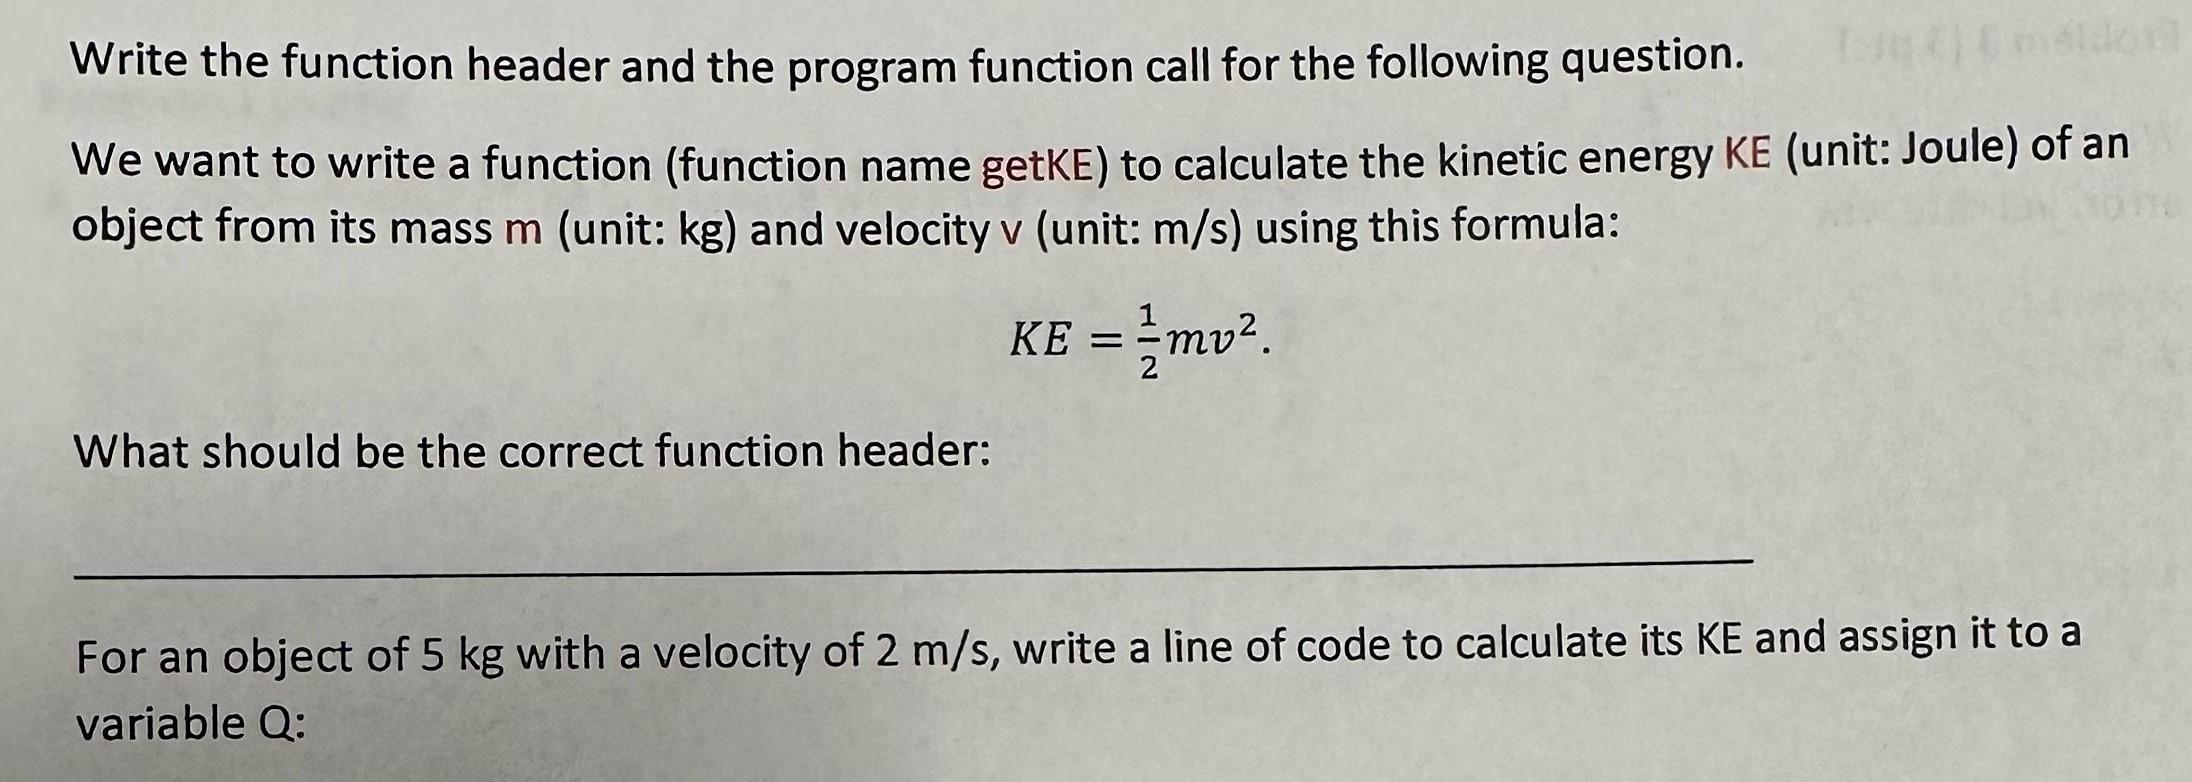 Write the function header and the program function call for the following question. We want to write a